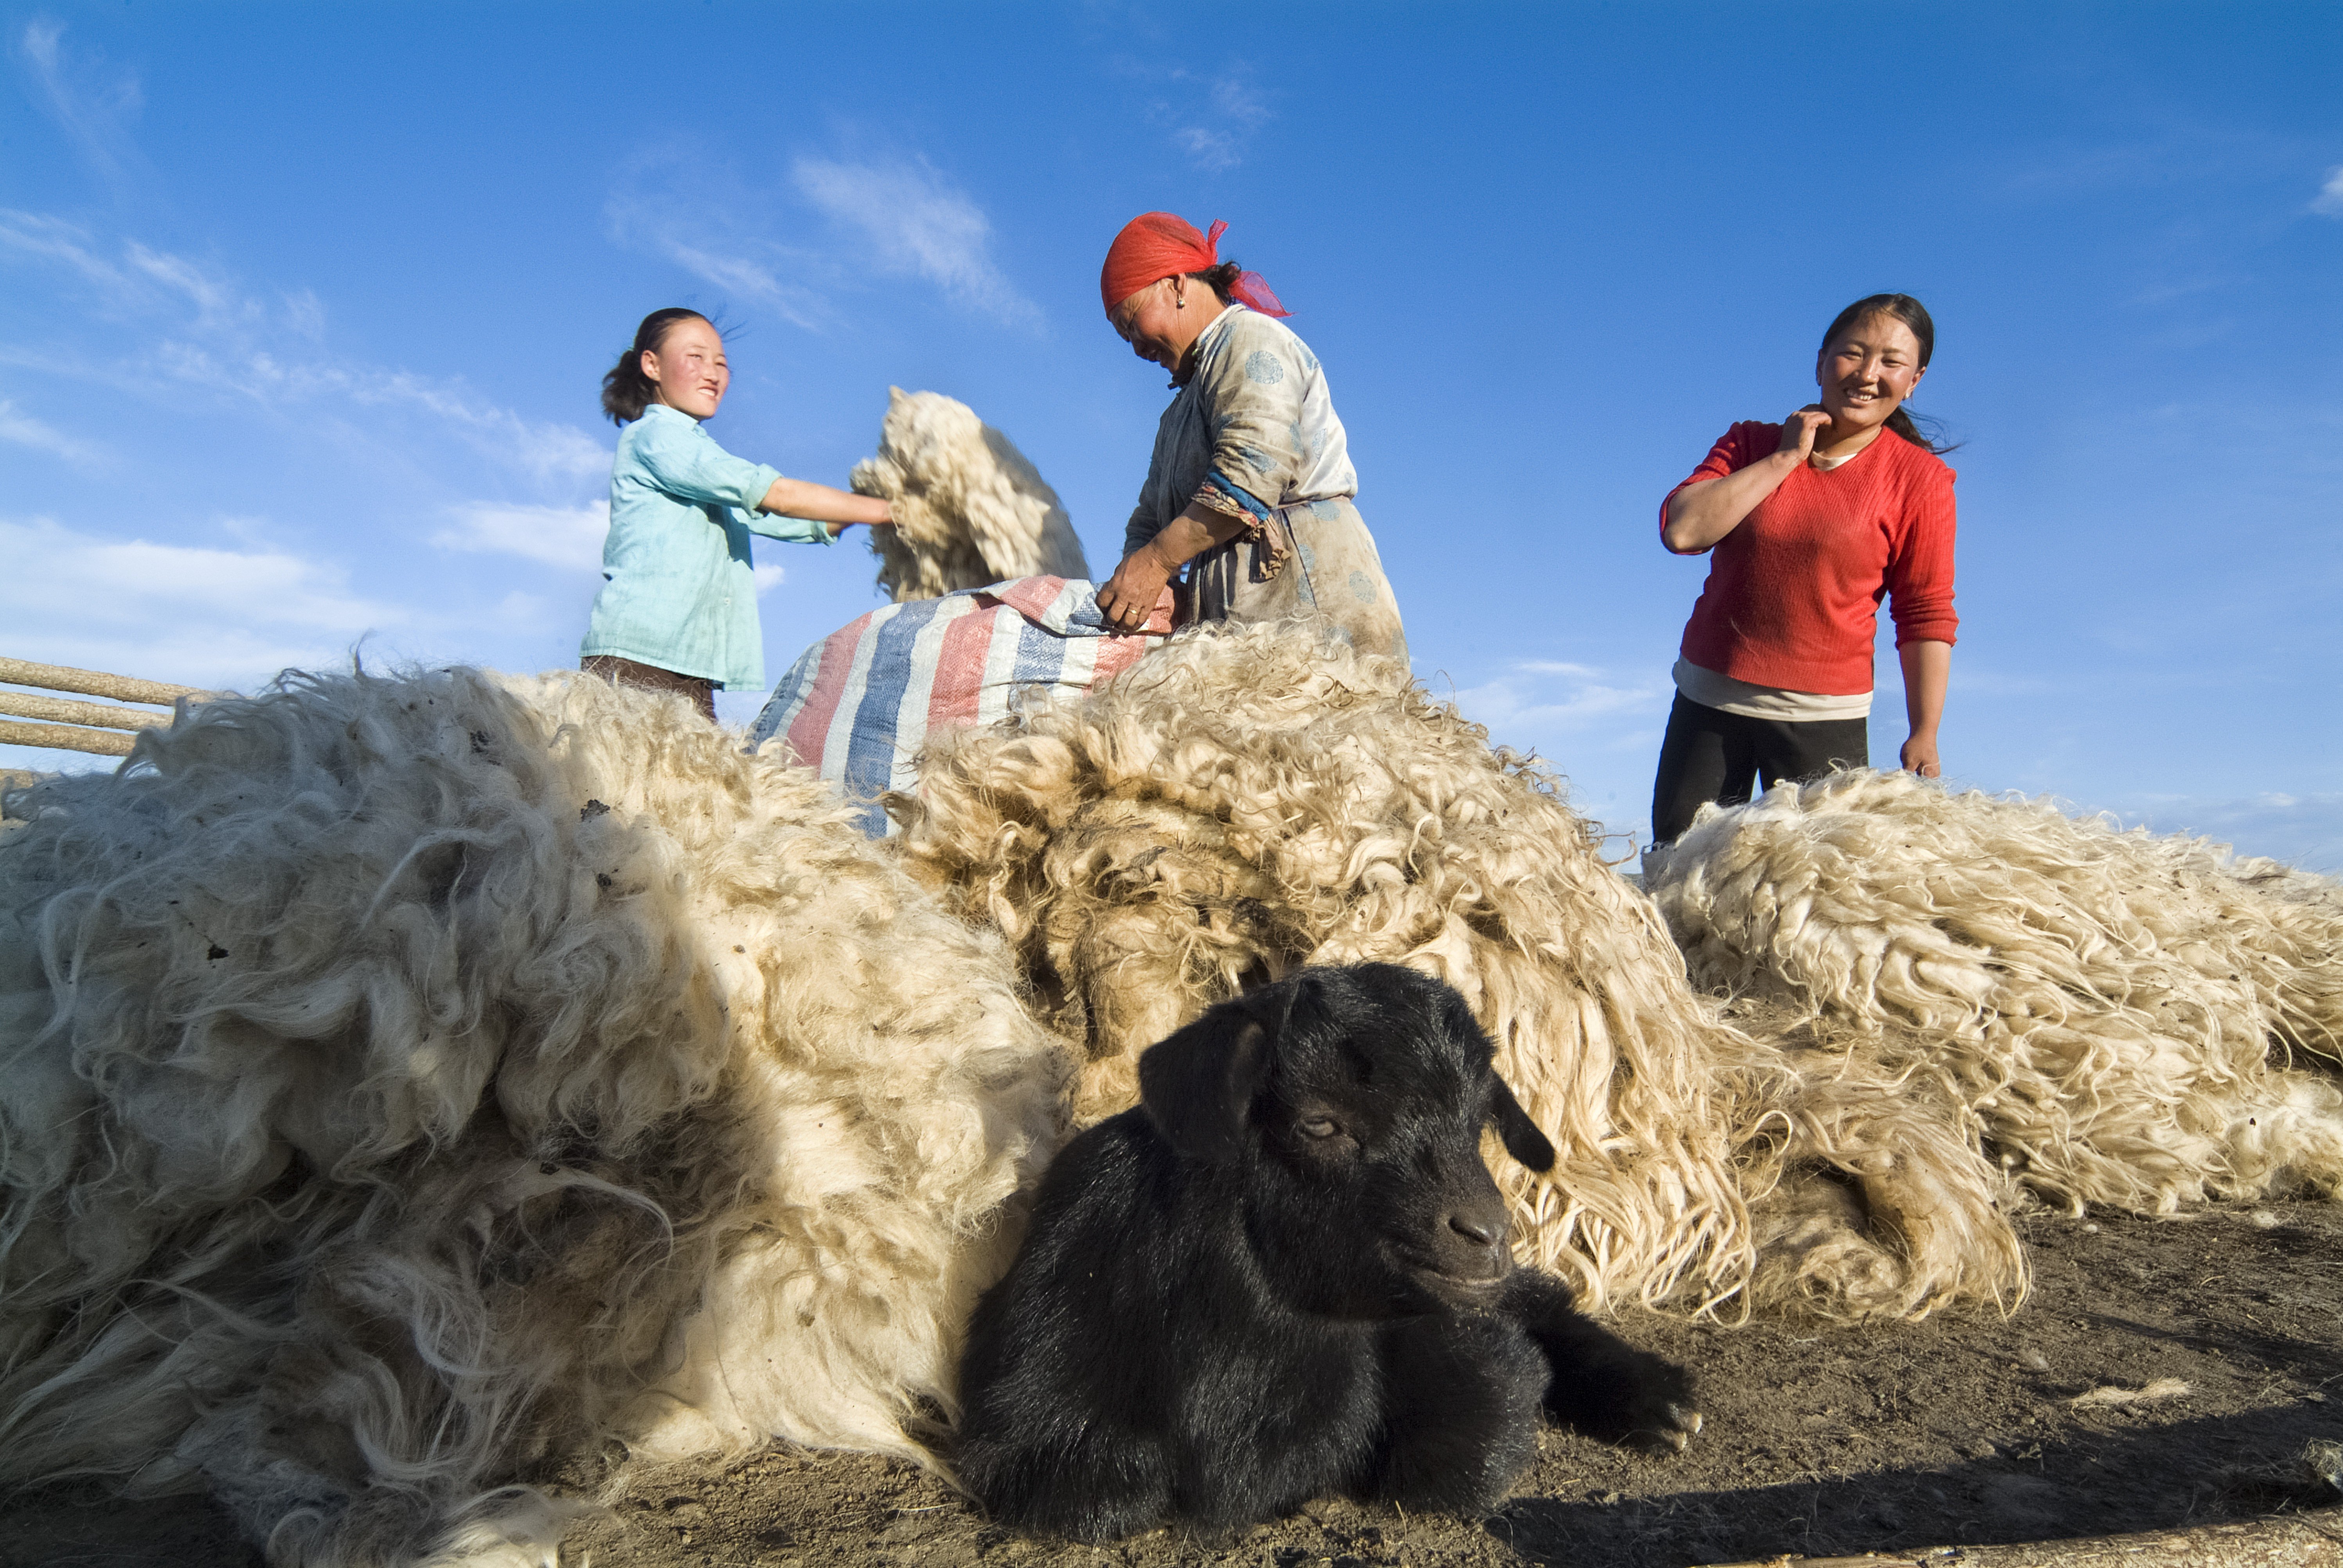 A nomadic herder family shears sheep and combs goats for cashmere in Mongolia's central grasslands. Photo: Zigor Aldama